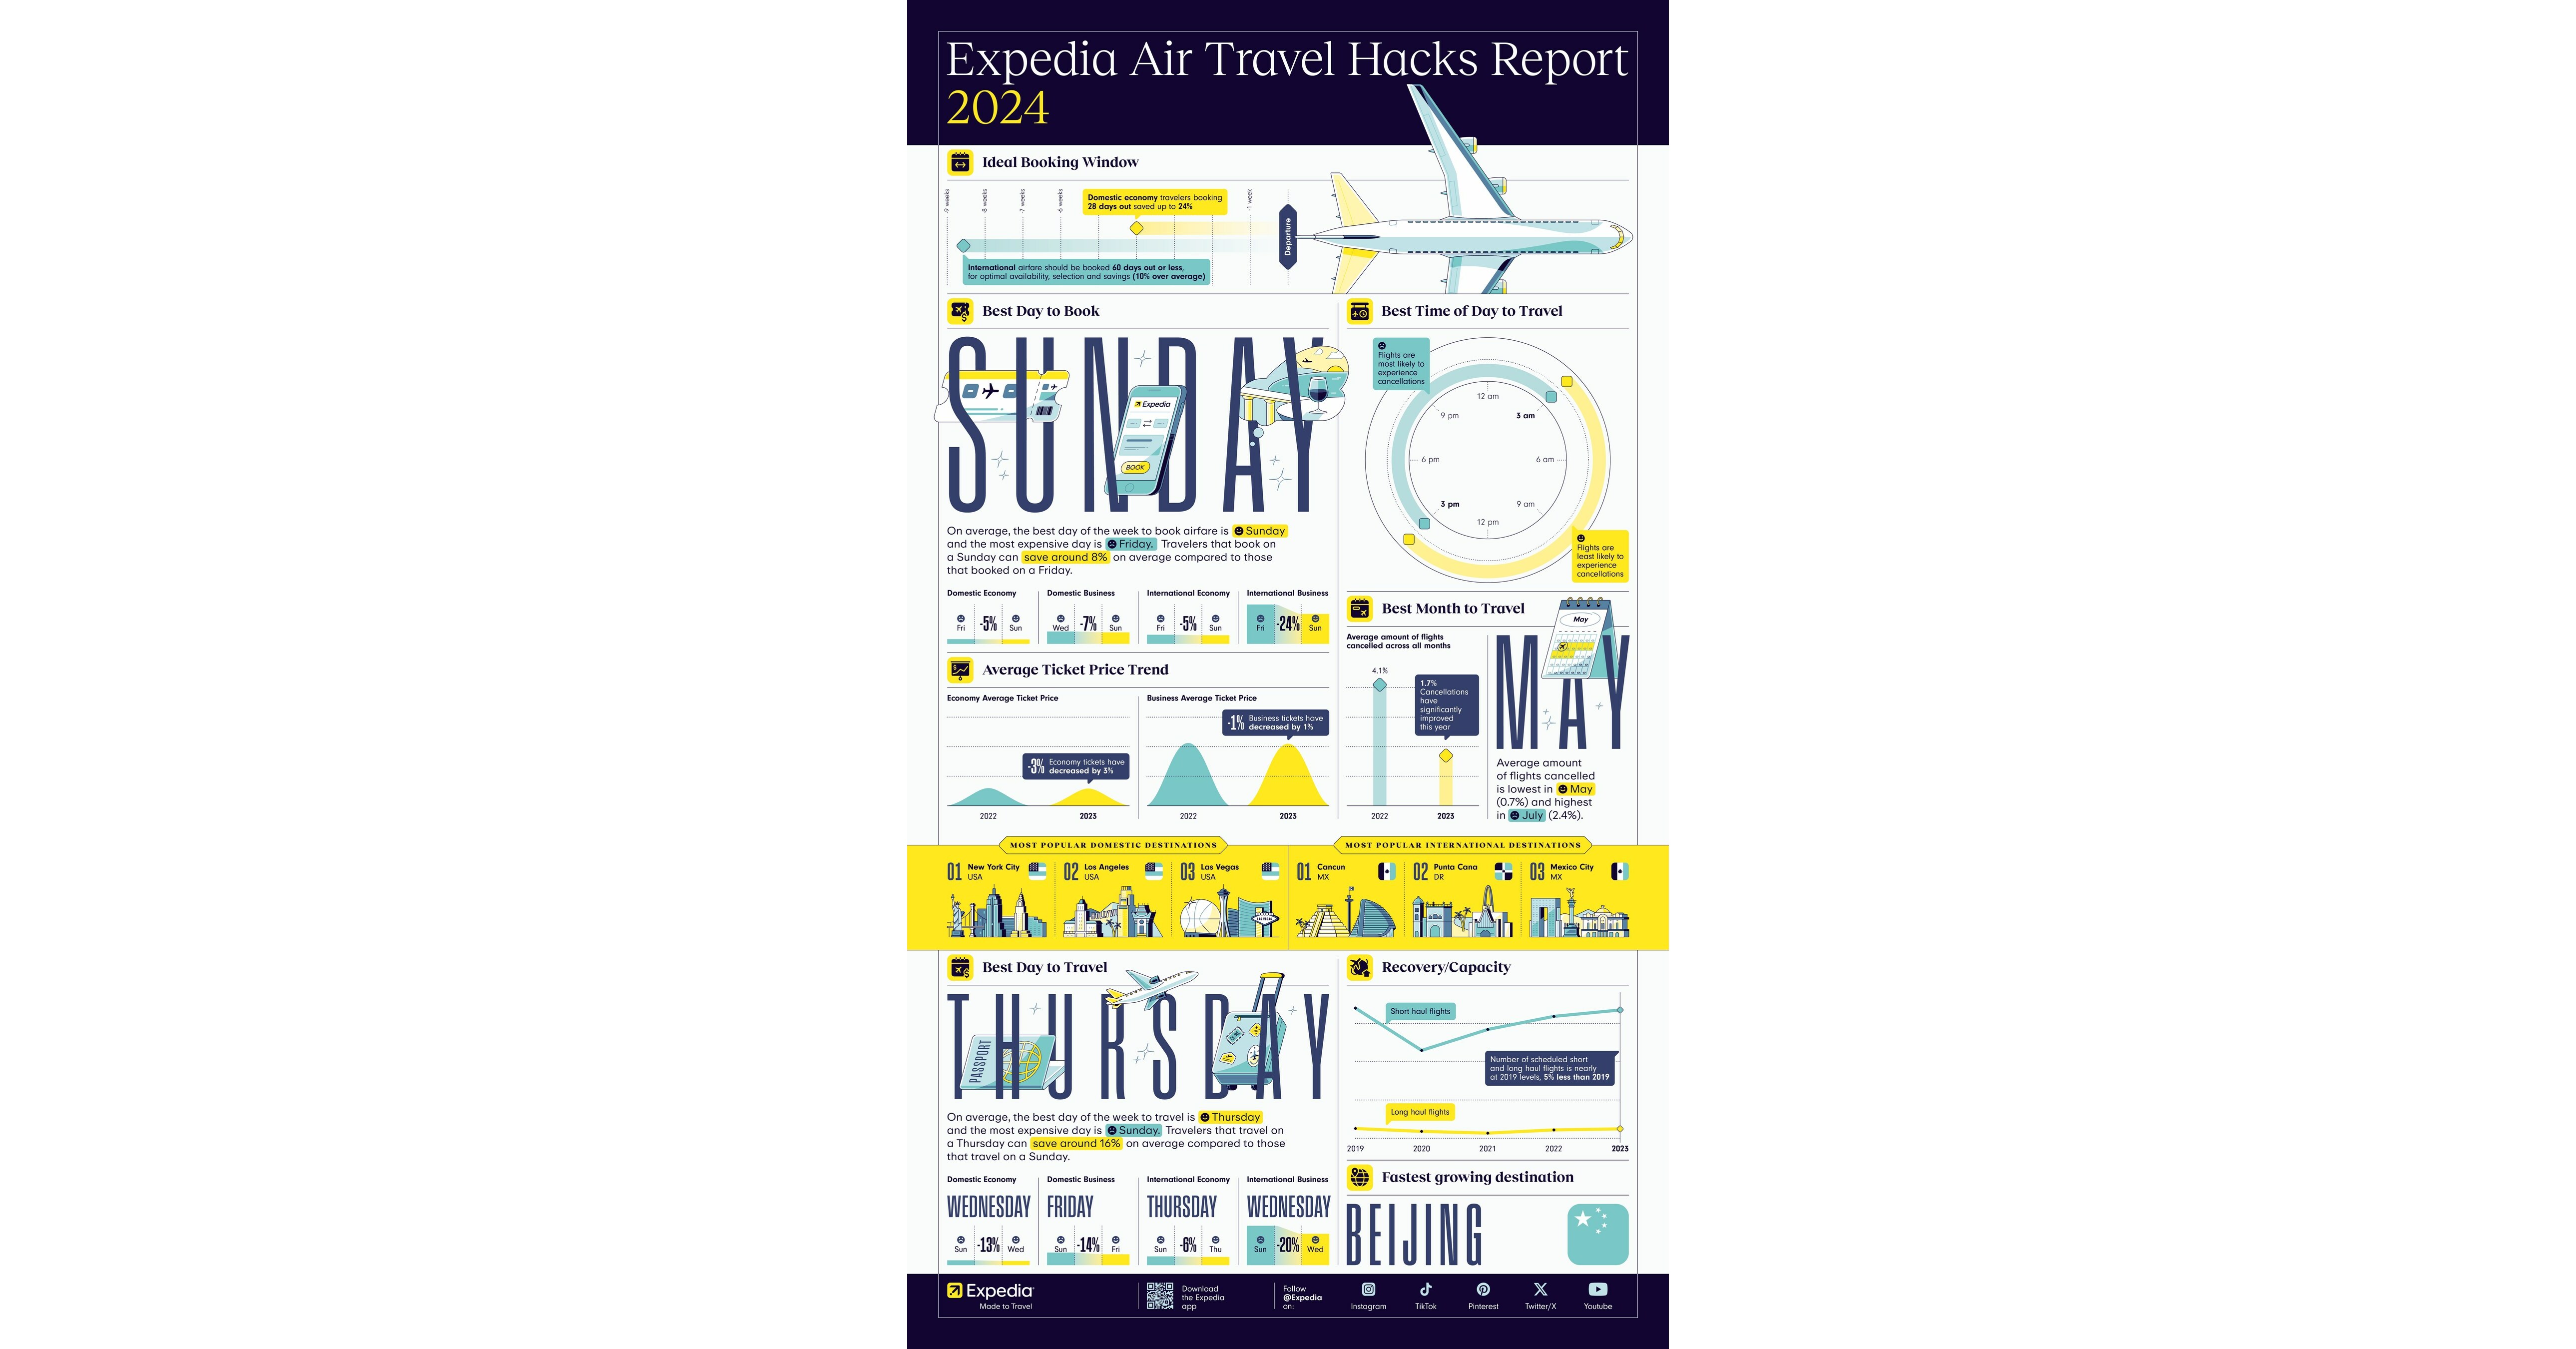 NEW REPORT FINDS AIR TRAVEL MORE STRESSFUL THAN GOING TO THE DENTIST; EXPEDIA RELEASES 2024 AIR TRAVEL HACKS REPORT FOR SMOOTHER TRAVEL